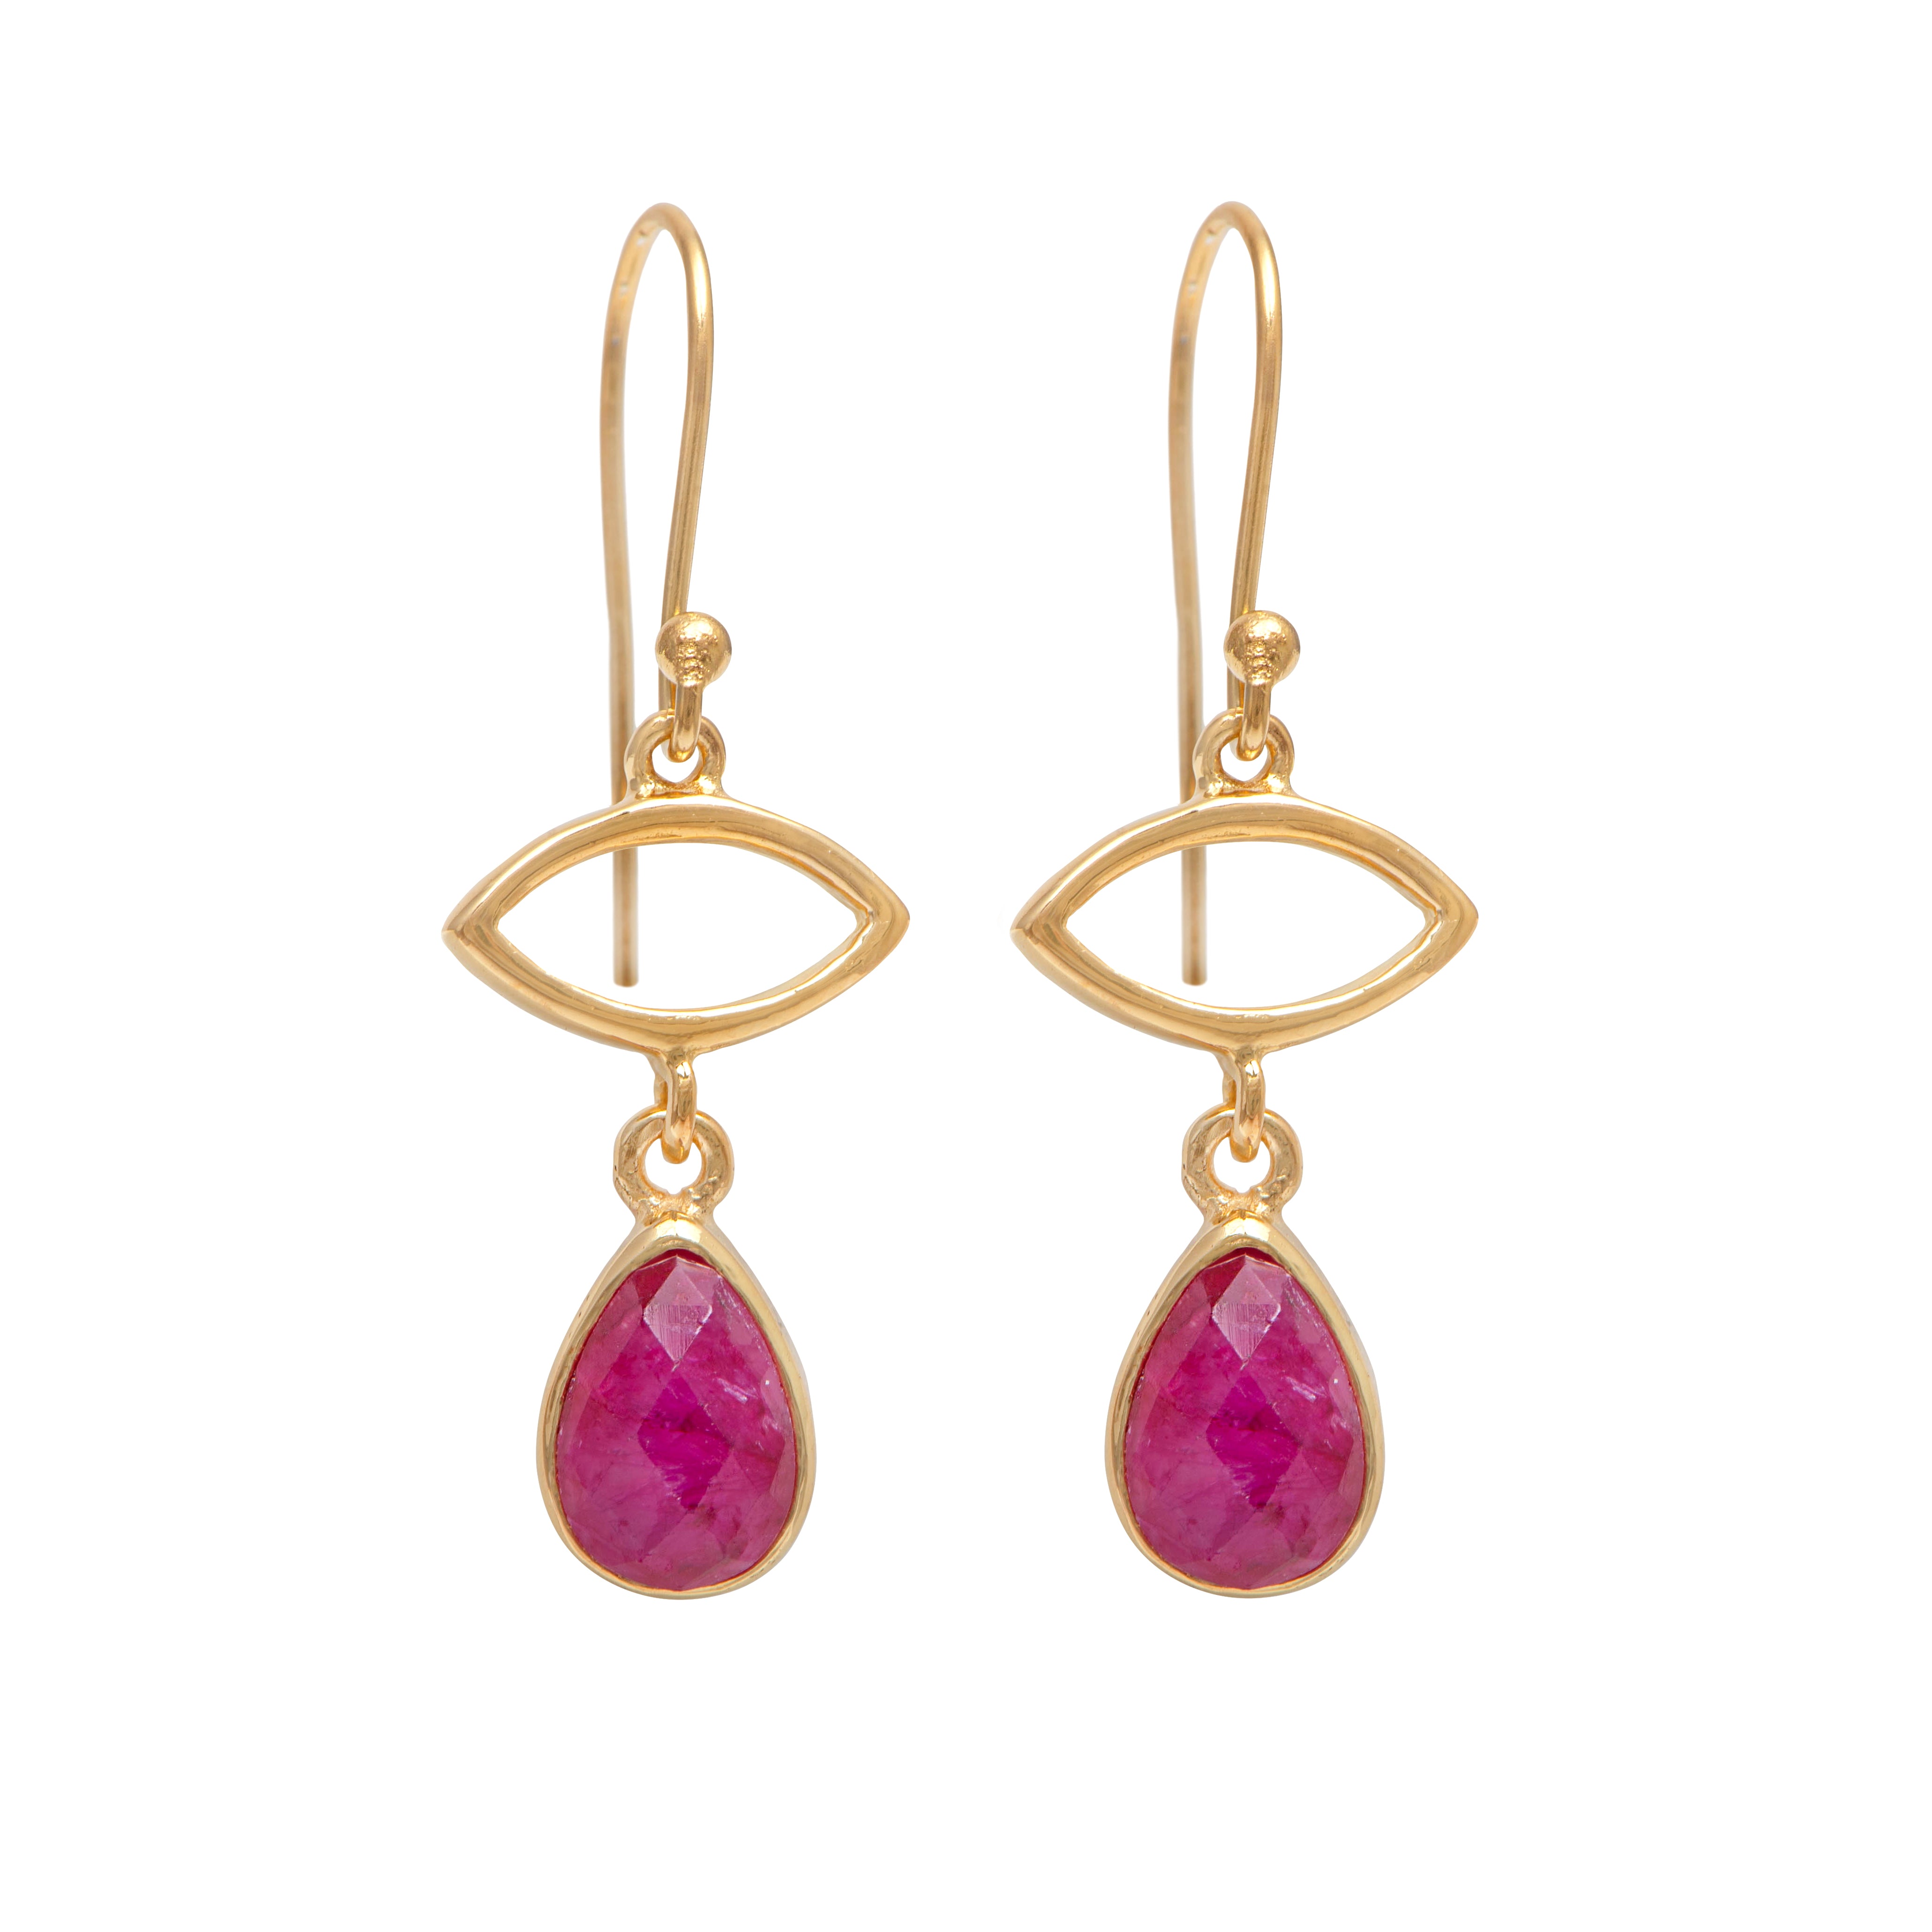 Gold Plated Drop Earrings with Ruby Quartz Gemstone